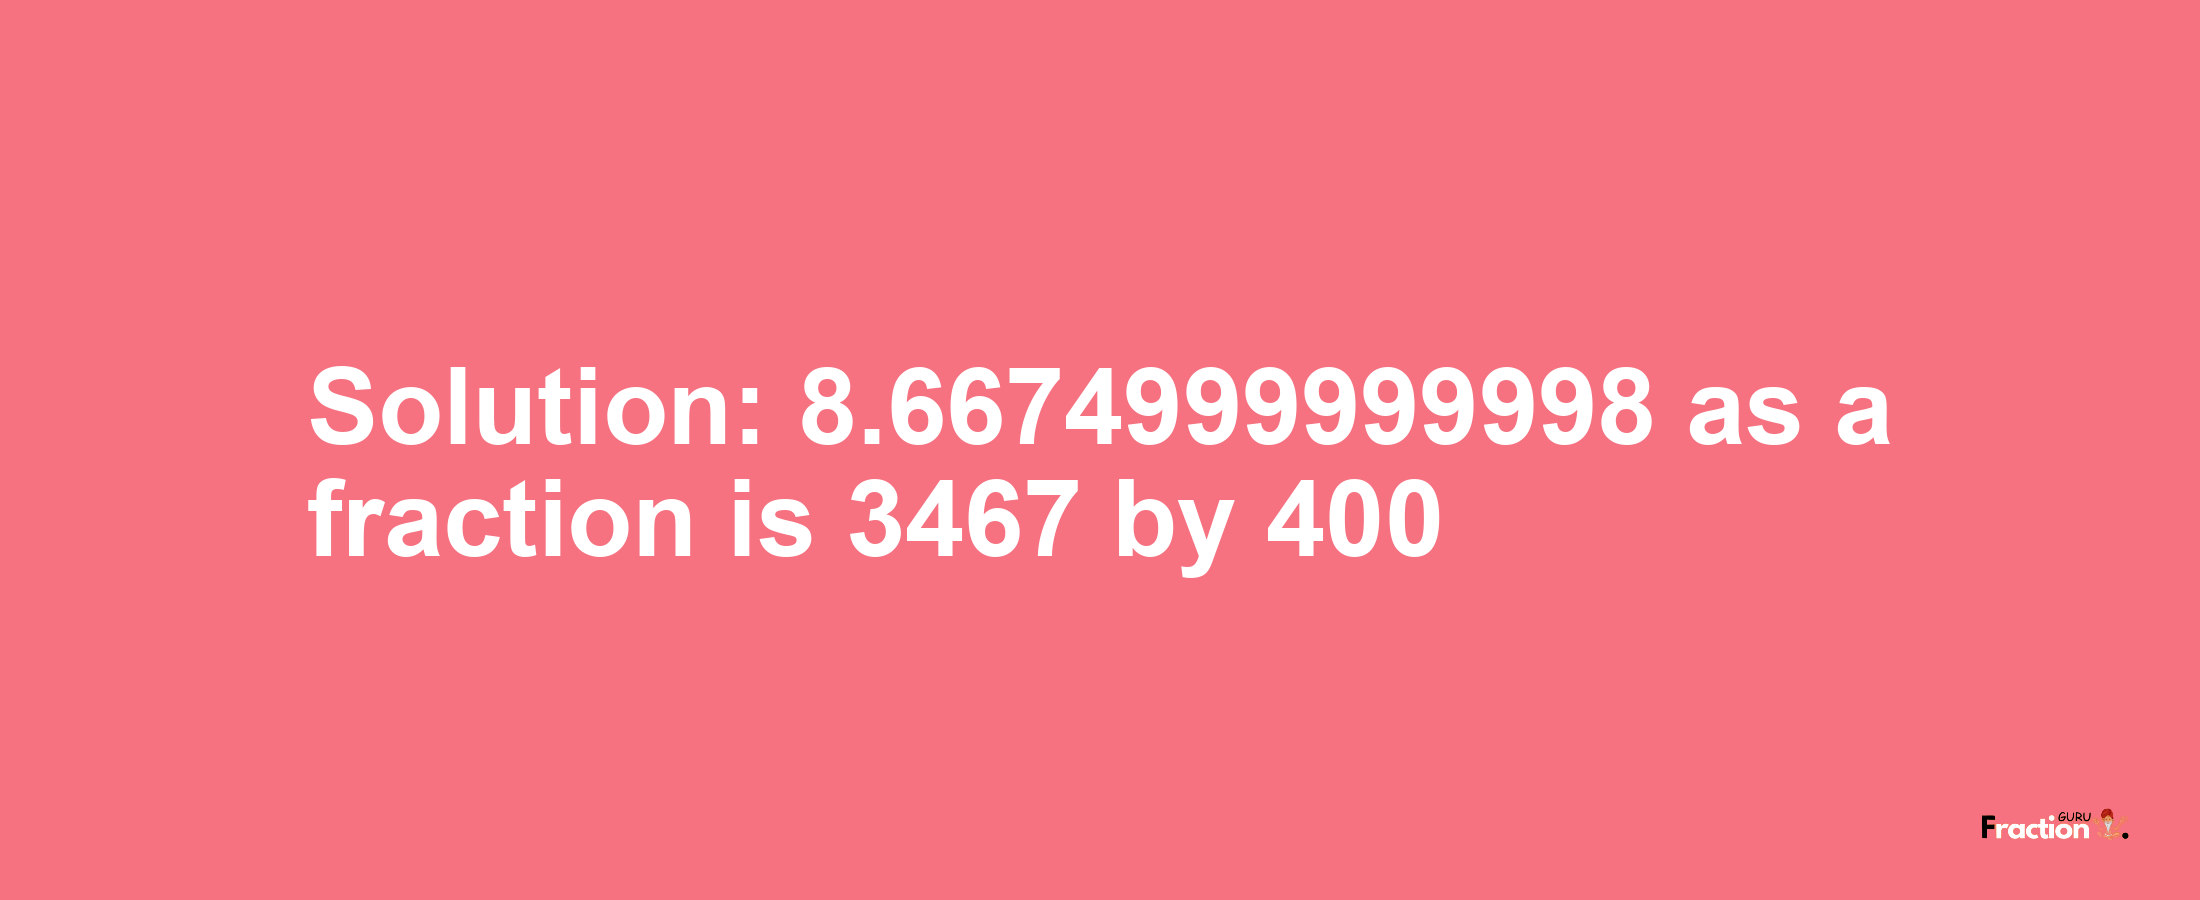 Solution:8.6674999999998 as a fraction is 3467/400